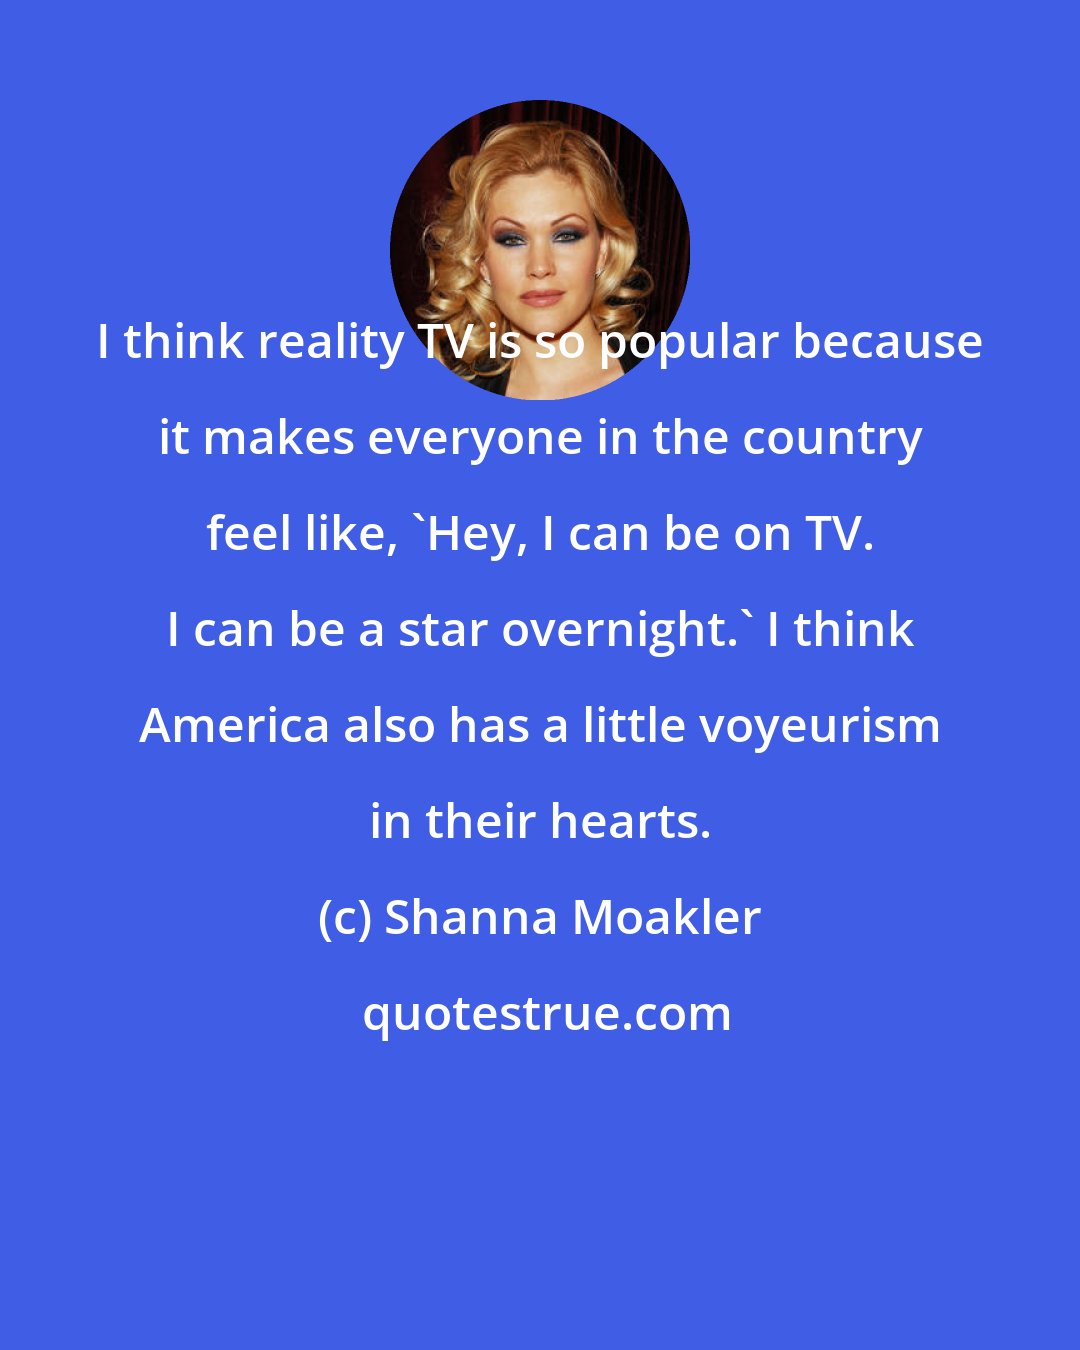 Shanna Moakler: I think reality TV is so popular because it makes everyone in the country feel like, 'Hey, I can be on TV. I can be a star overnight.' I think America also has a little voyeurism in their hearts.